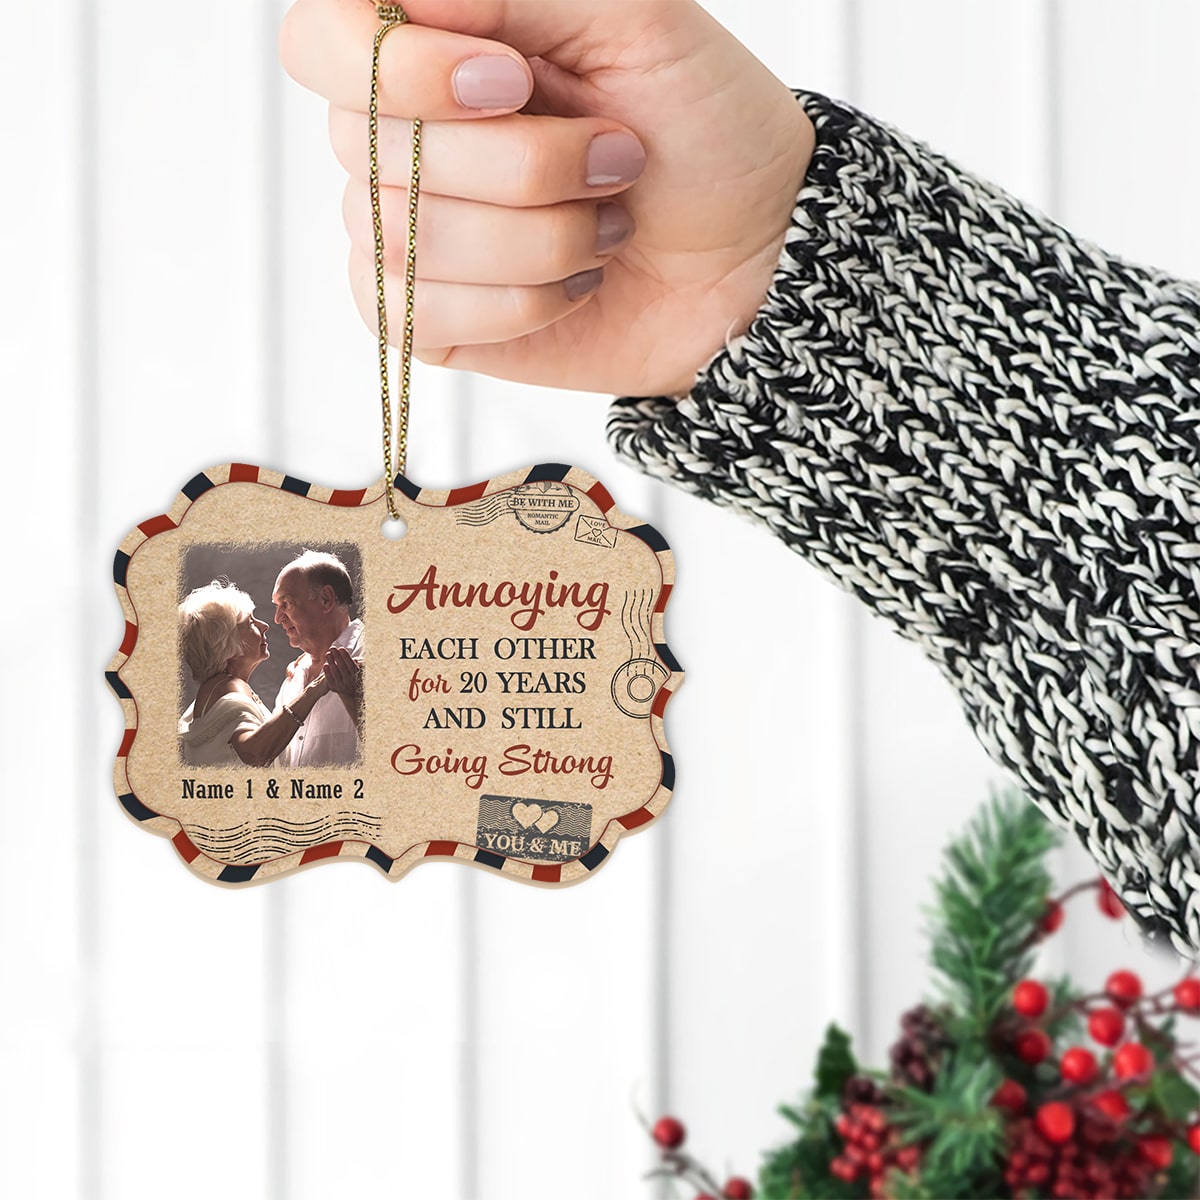 Annoying Each Other For Years And Still Going Strong Personalized Custom Name Aluminum Ornaments